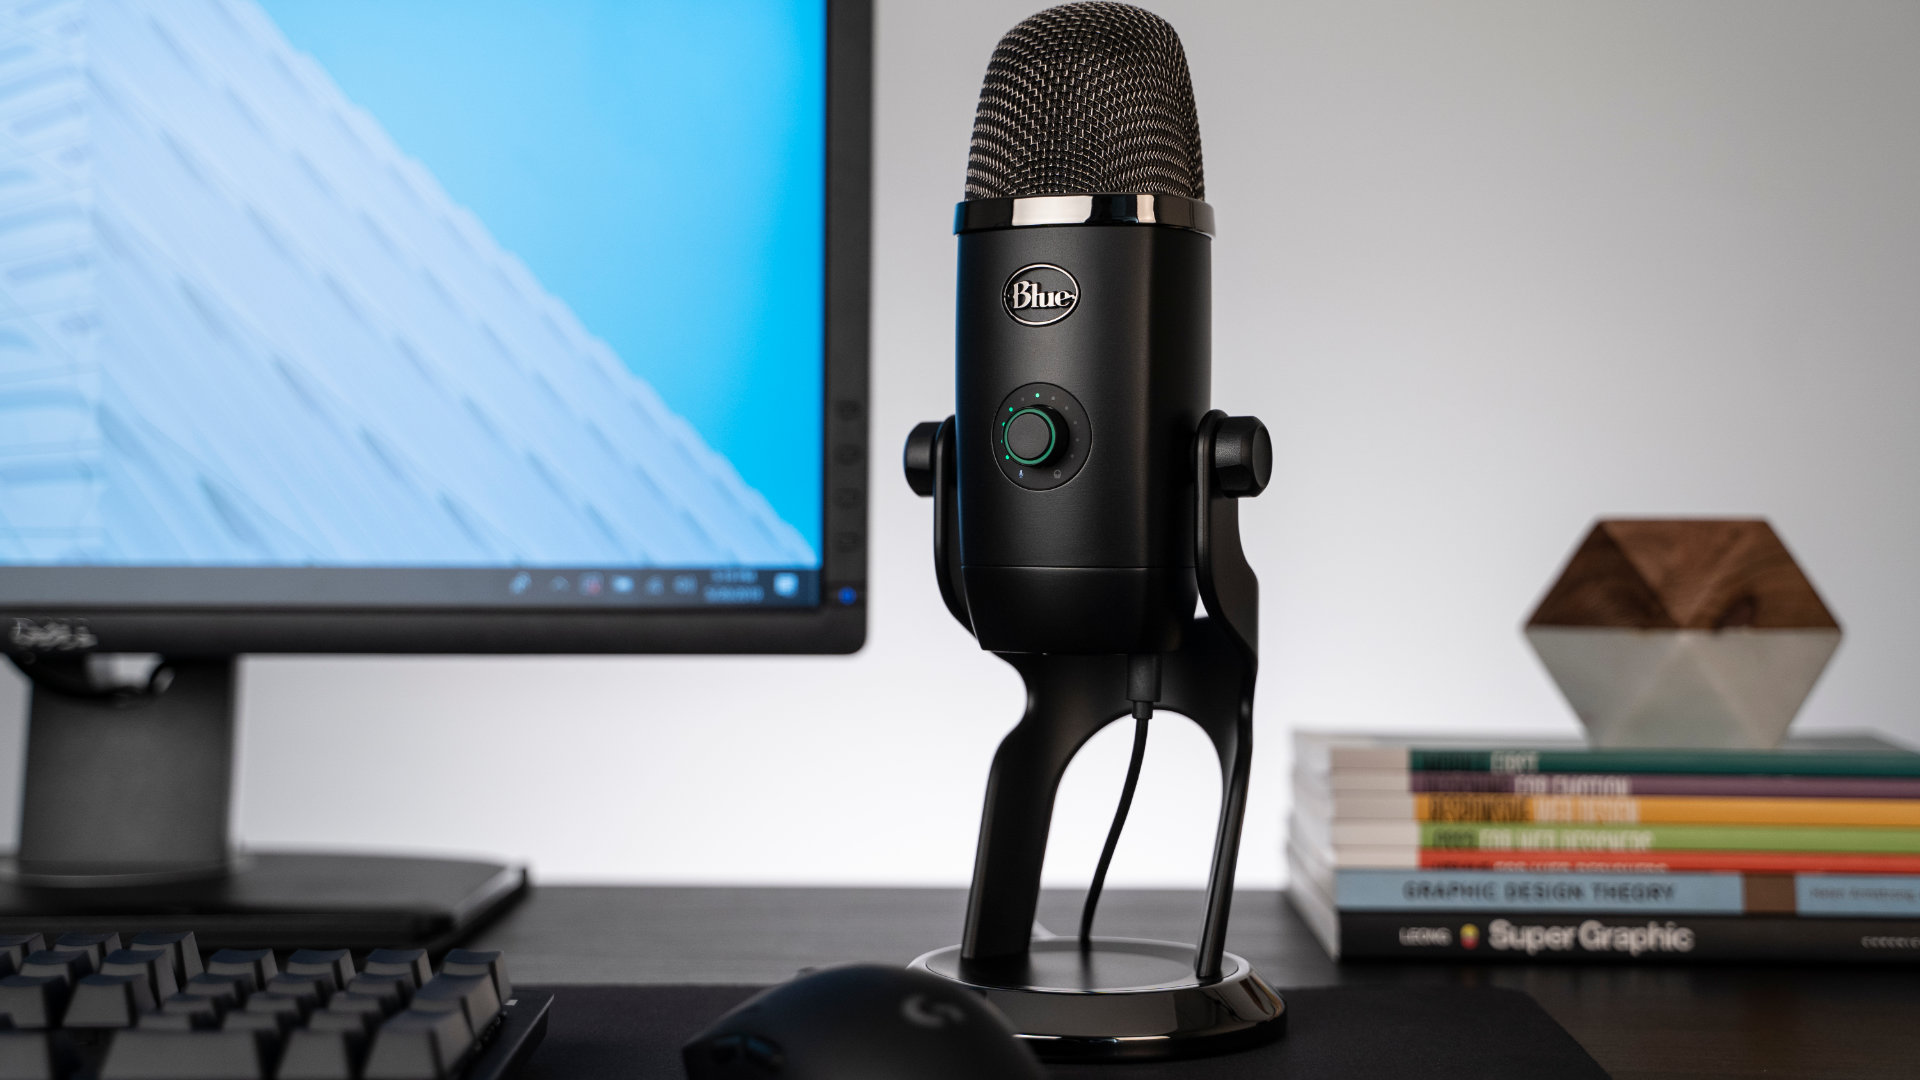 Best gaming microphone: the Blue Yeti X on a desk beside a monitor,